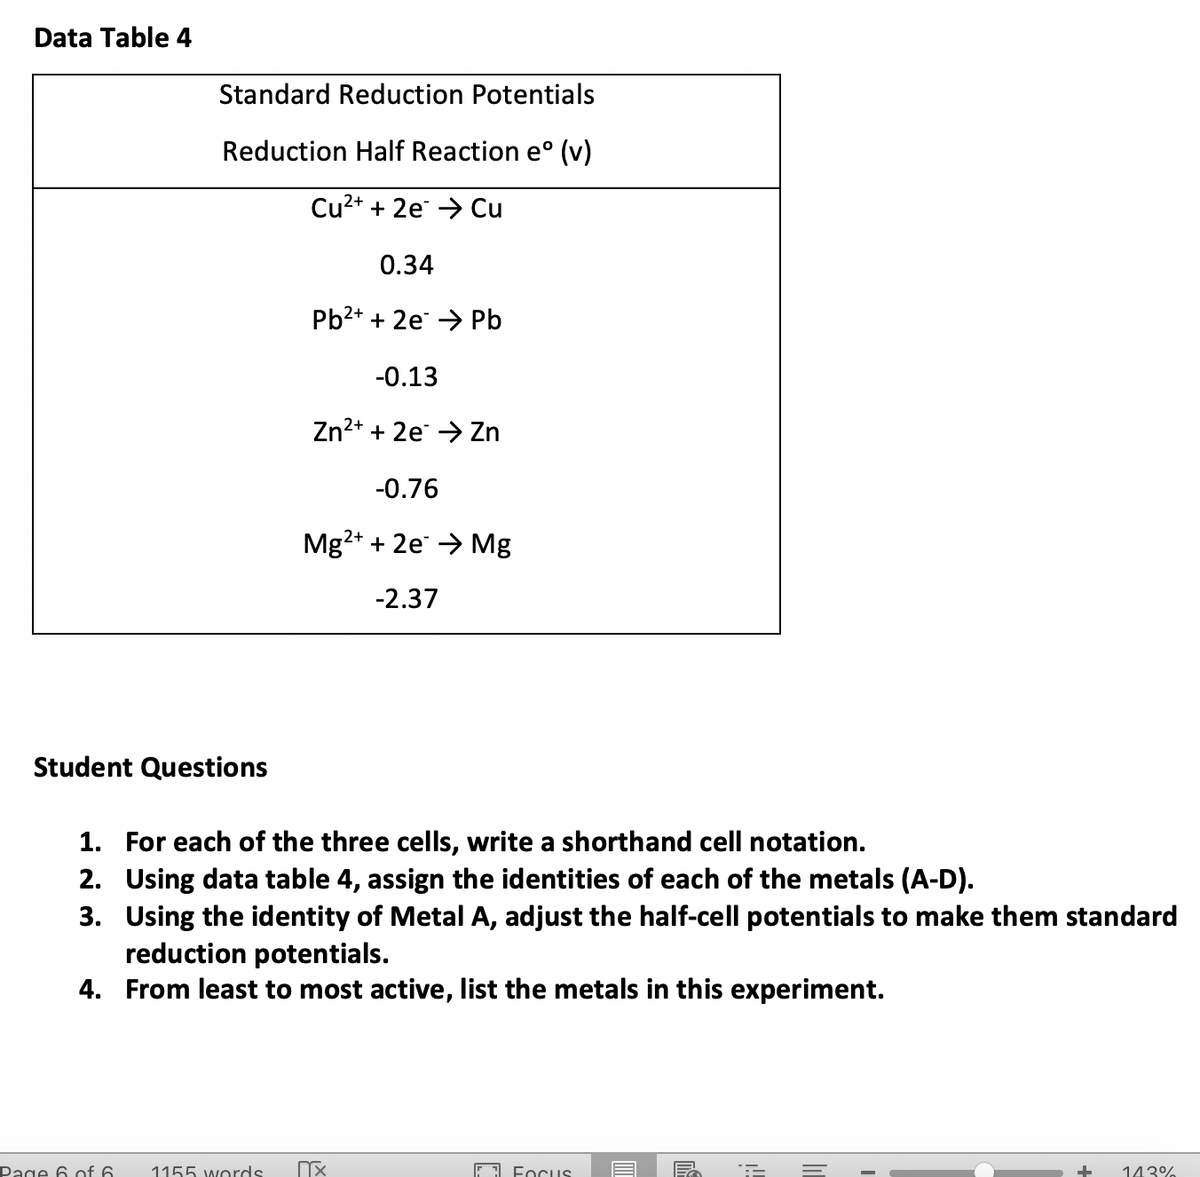 Data Table 4
Standard Reduction Potentials
Reduction Half Reaction e° (v)
Cu2+ + 2e → Cu
0.34
Pb2+ + 2e → Pb
-0.13
Zn2+ + 2e → Zn
-0.76
Mg2+ + 2e → Mg
-2.37
Student Questions
1. For each of the three cells, write a shorthand cell notation.
2. Using data table 4, assign the identities of each of the metals (A-D).
3. Using the identity of Metal A, adjust the half-cell potentials to make them standard
reduction potentials.
4. From least to most active, list the metals in this experiment.
Page 6 of 6
1155 words
EI Focus
143%
